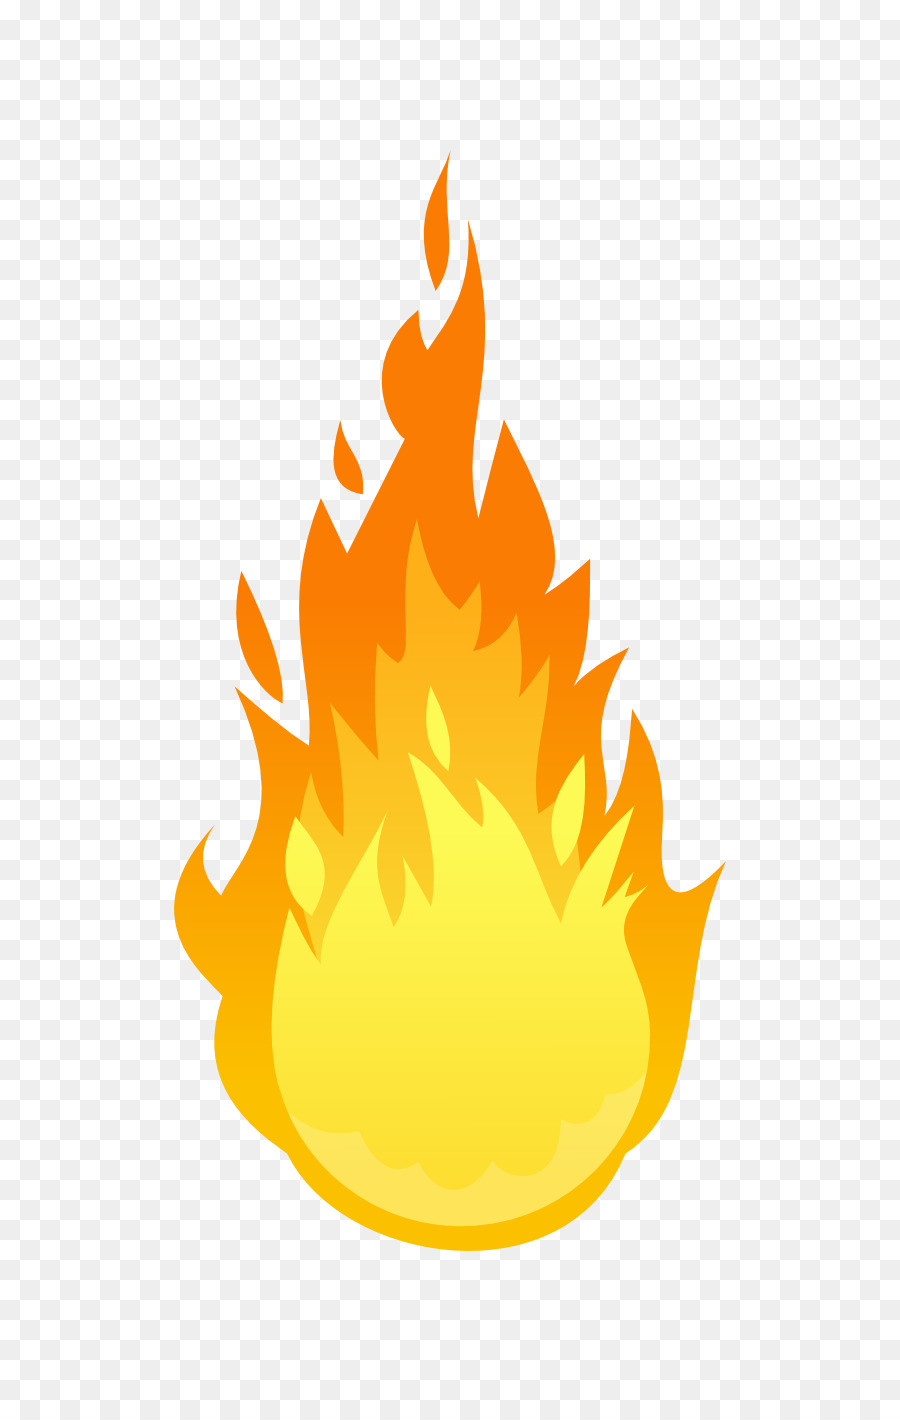 Fire Flame Clip art - droplet png download - 852*1401 - Free Transparent Fire png Download.